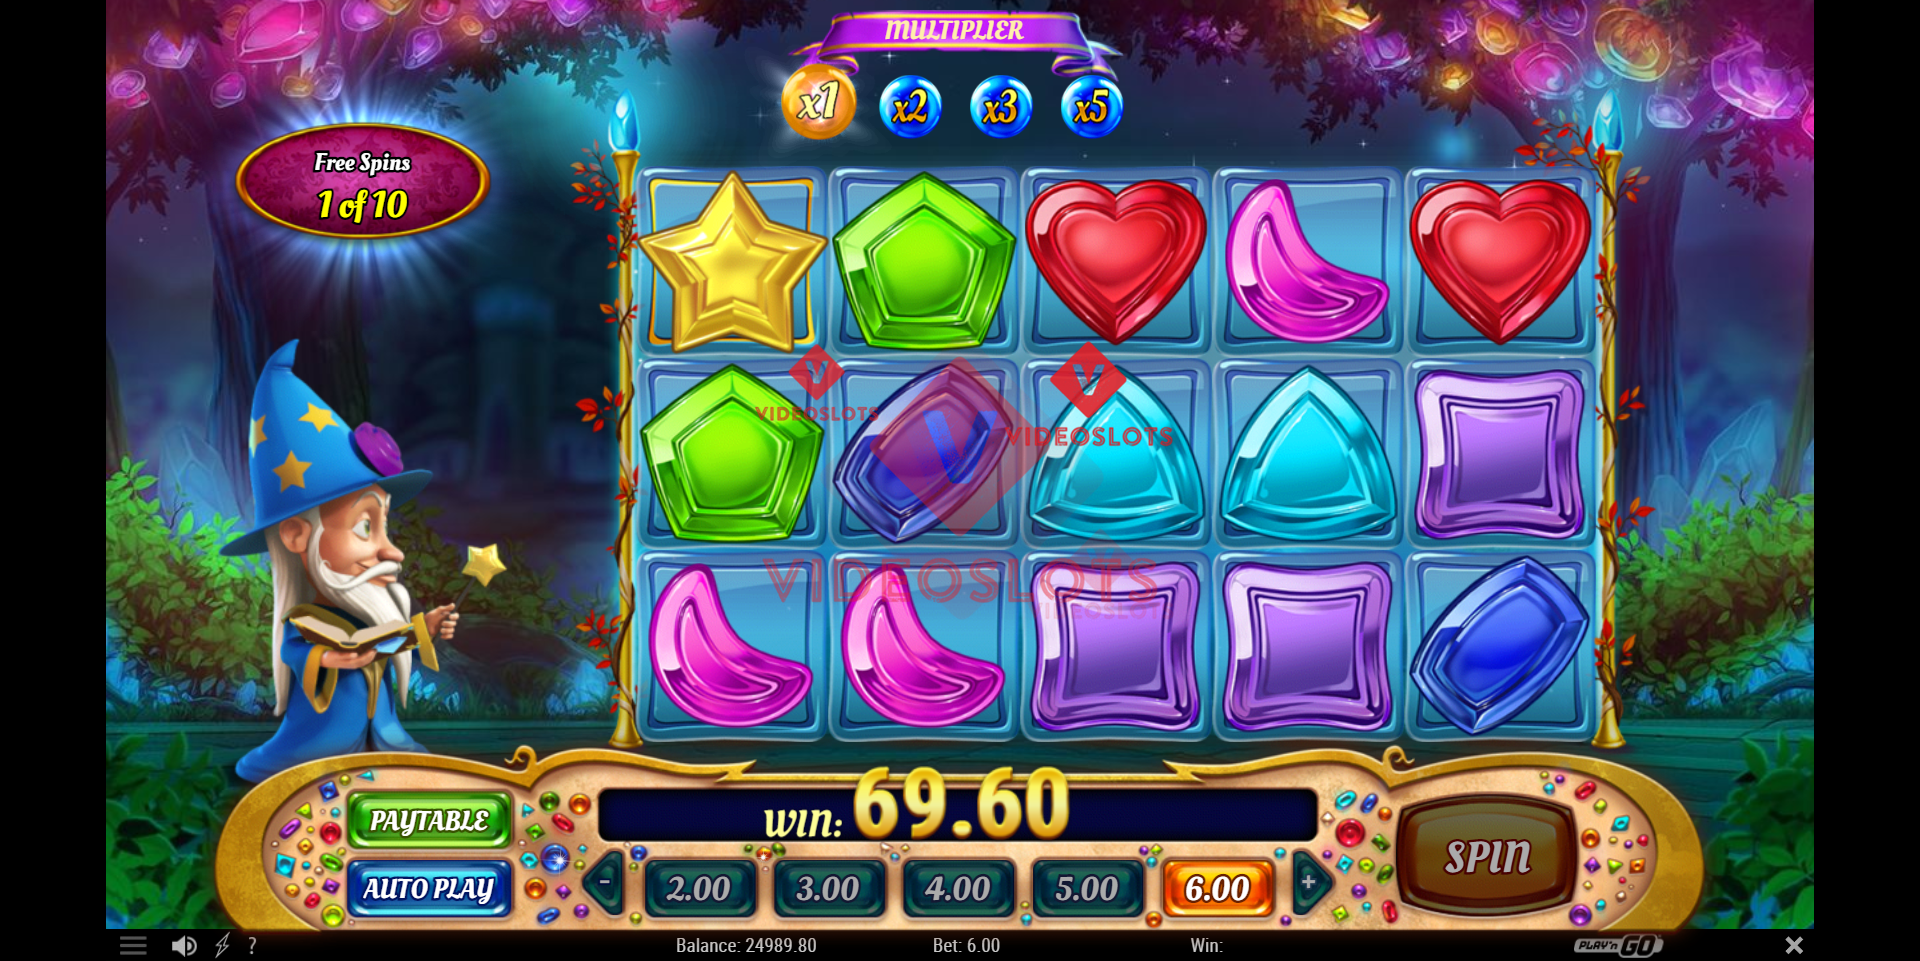 Base Game for Wizard of Gems slot from Play'n Go